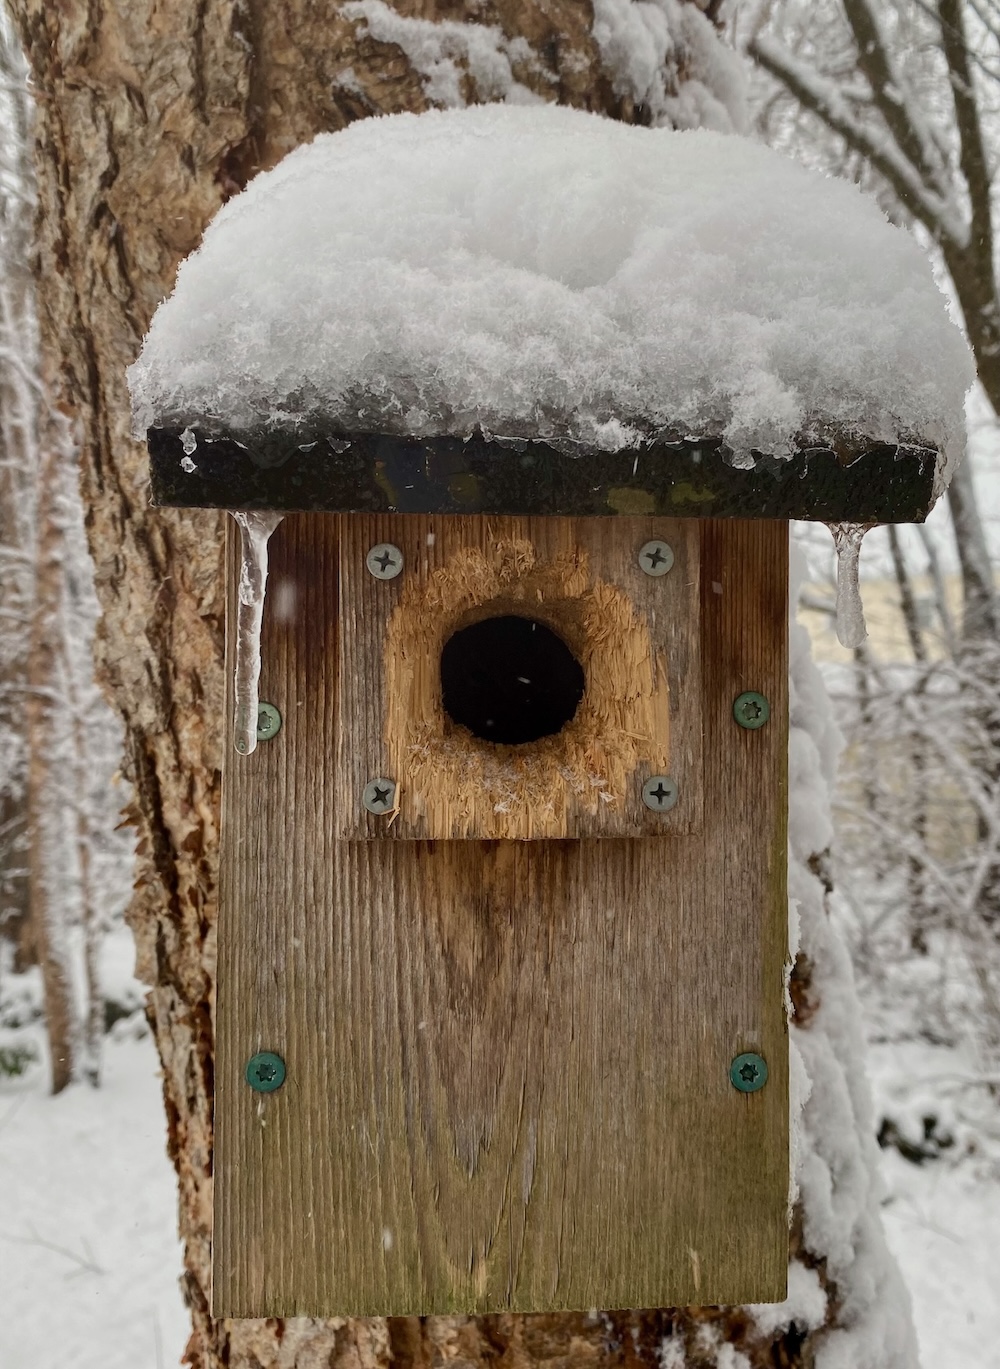 It's the weekend! Number 321, Backyard Birdhouse with Snow-Covered Roof